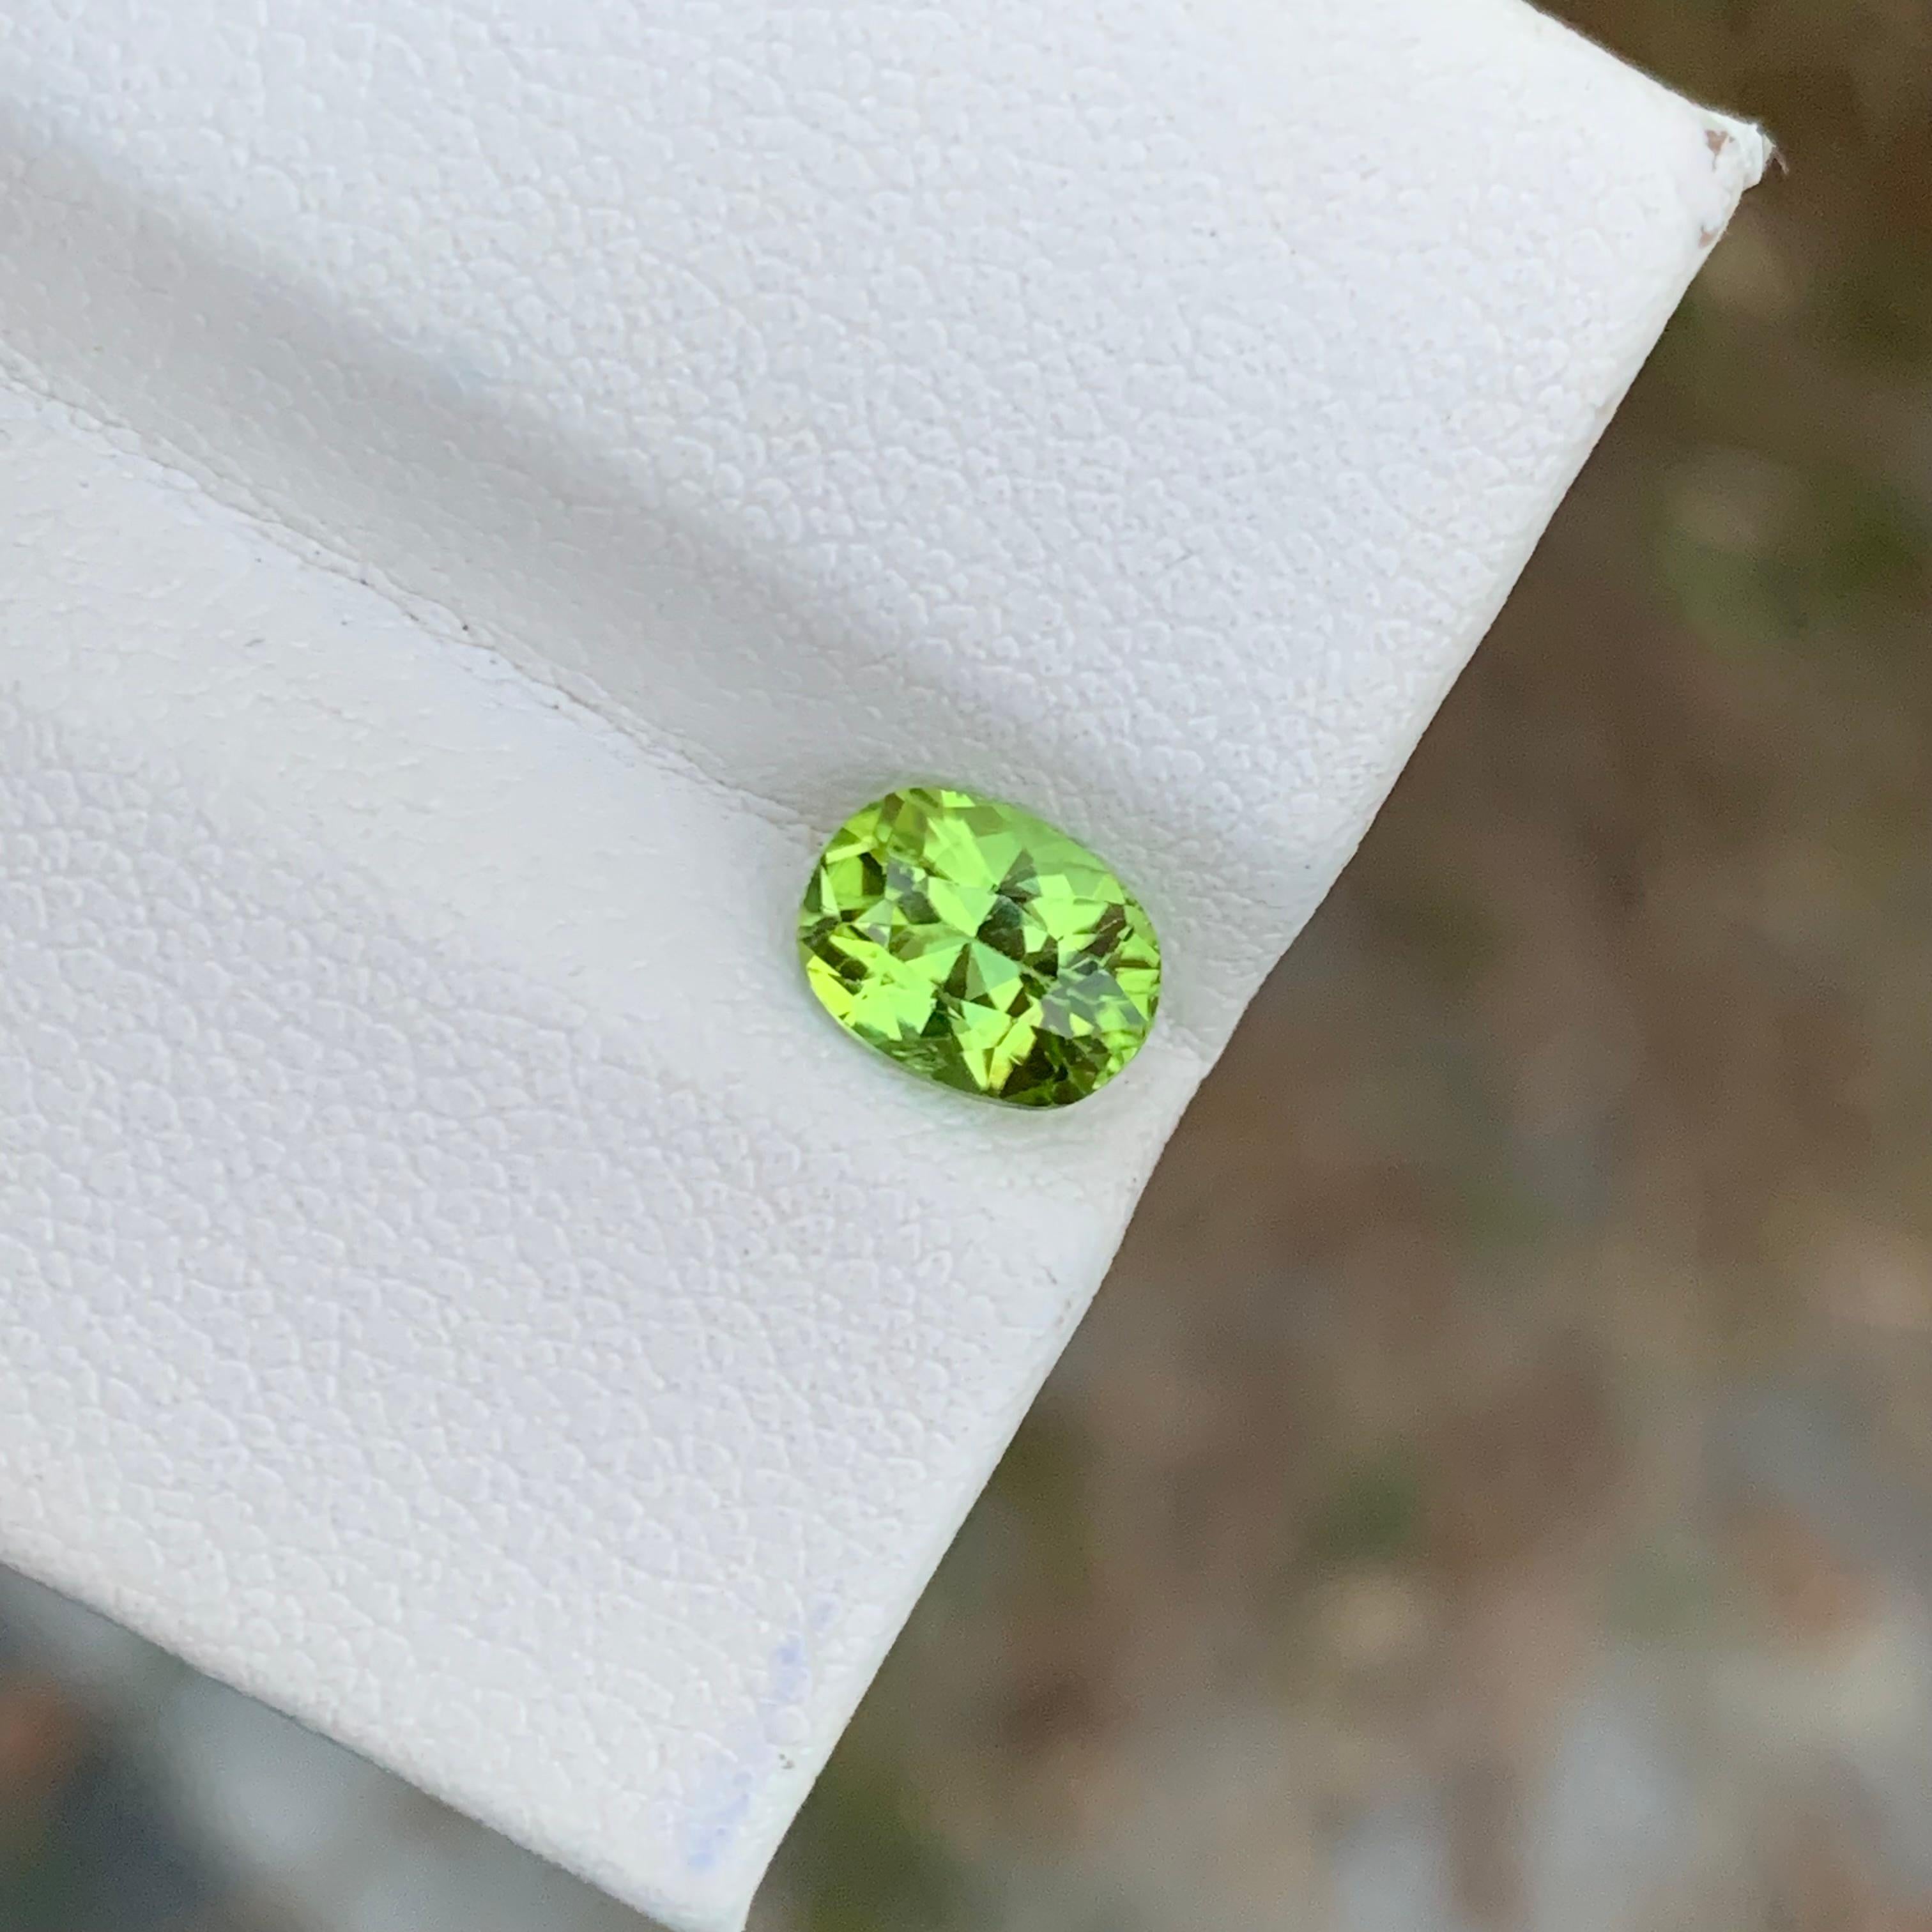 Loose Peridot
Weight: 1.40 Carats 
Dimension: 7.5x5.6x4.6 Mm
Origin: Pakistan 
Shape: Oval
Color: Green
Treatment: Non
Peridot is a stunning green gemstone known for its vibrant color and unique properties. This gem belongs to the mineral olivine,